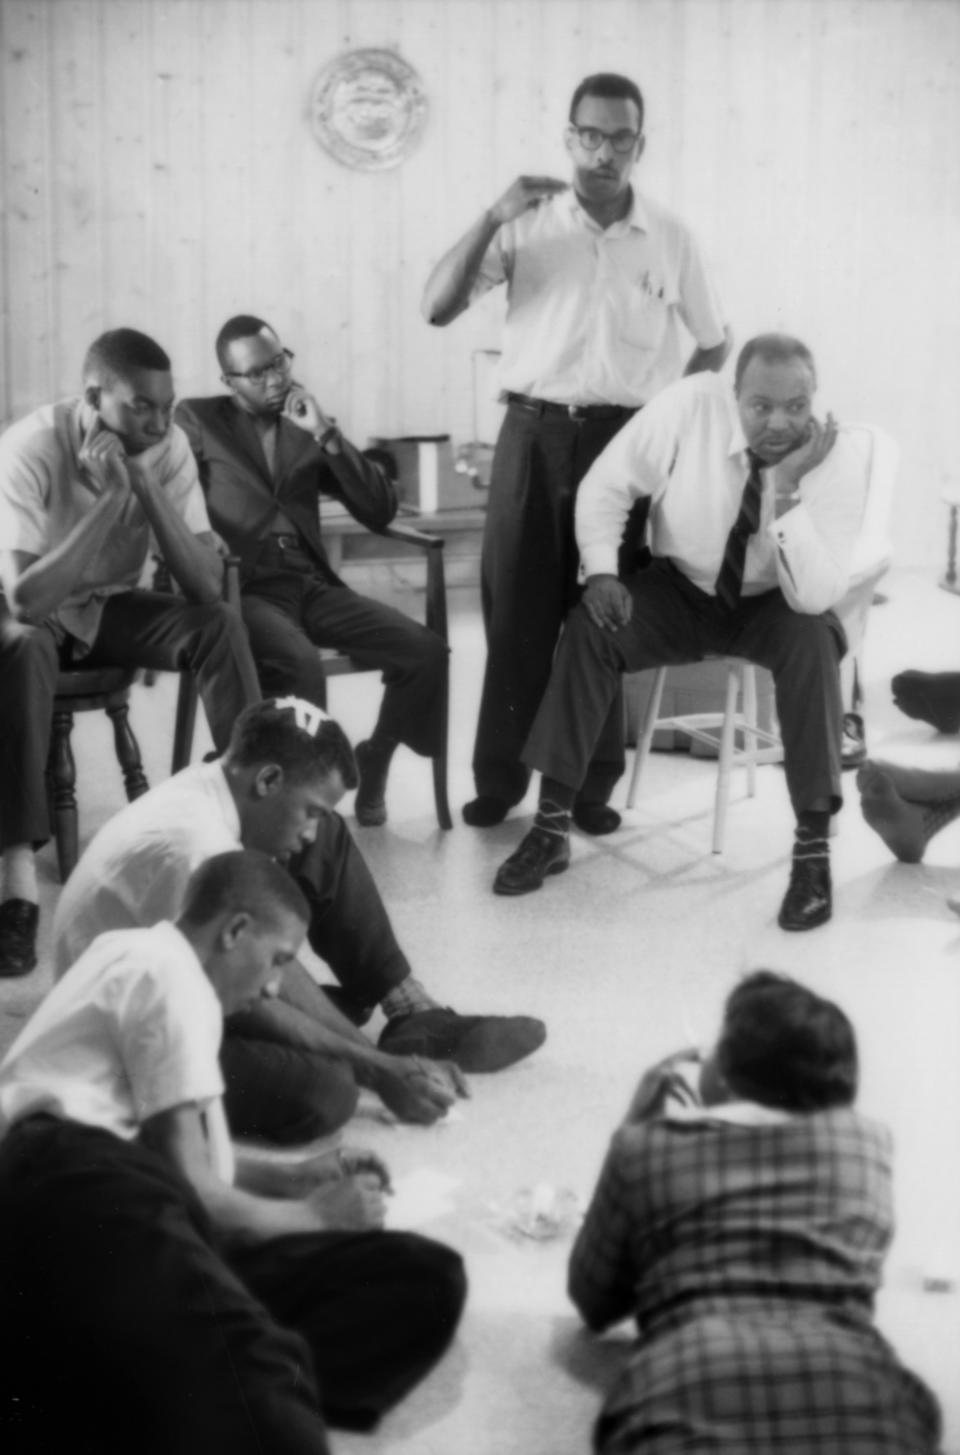 Freedom Rider John Lewis with a bandaged head, relaxing and regrouping with fellow Freedom Riders in a safe house in Montgomery, Ala., during the Freedom Rider crisis in May of 1961.  (Photo: Paul Schutzer/Time Life Pictures/Getty Images)